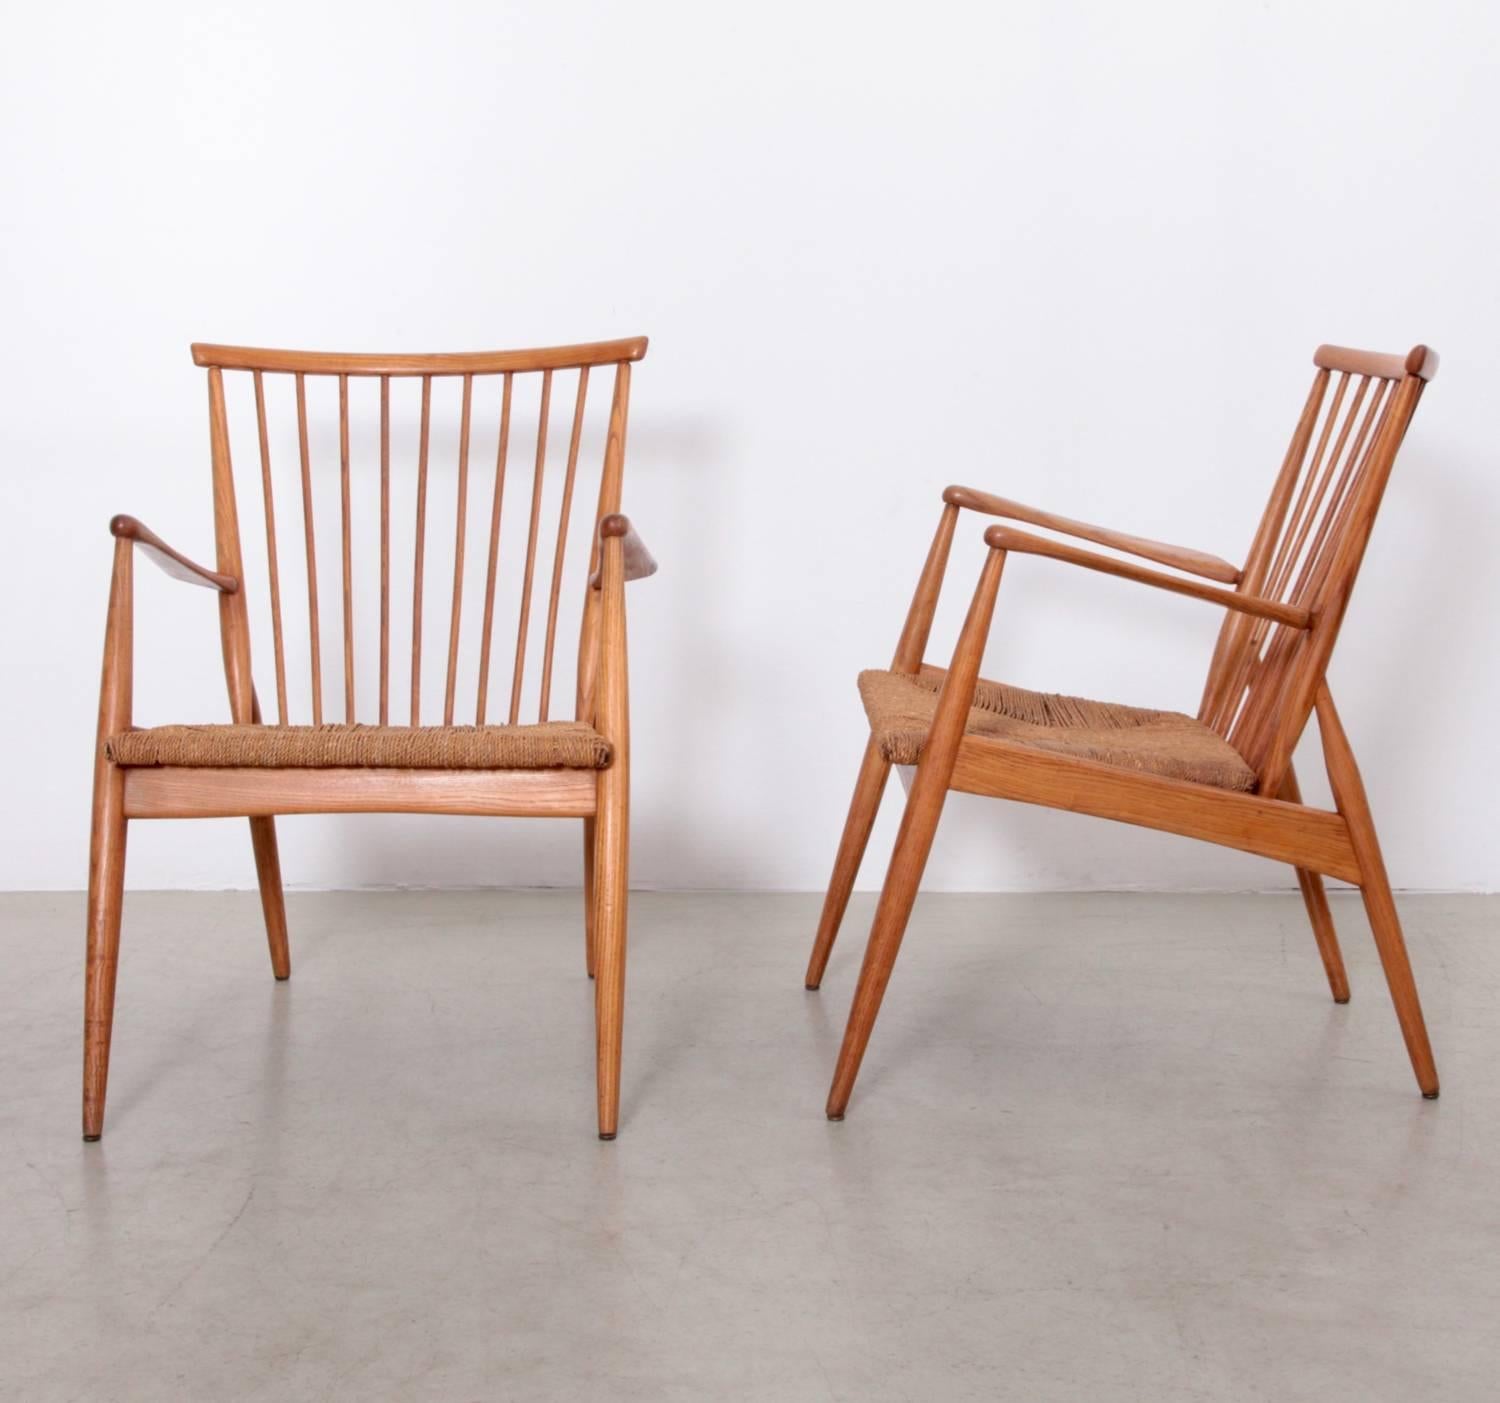 Excellent pair of German studio lounge chairs with papercord seats and solid ash frame.

